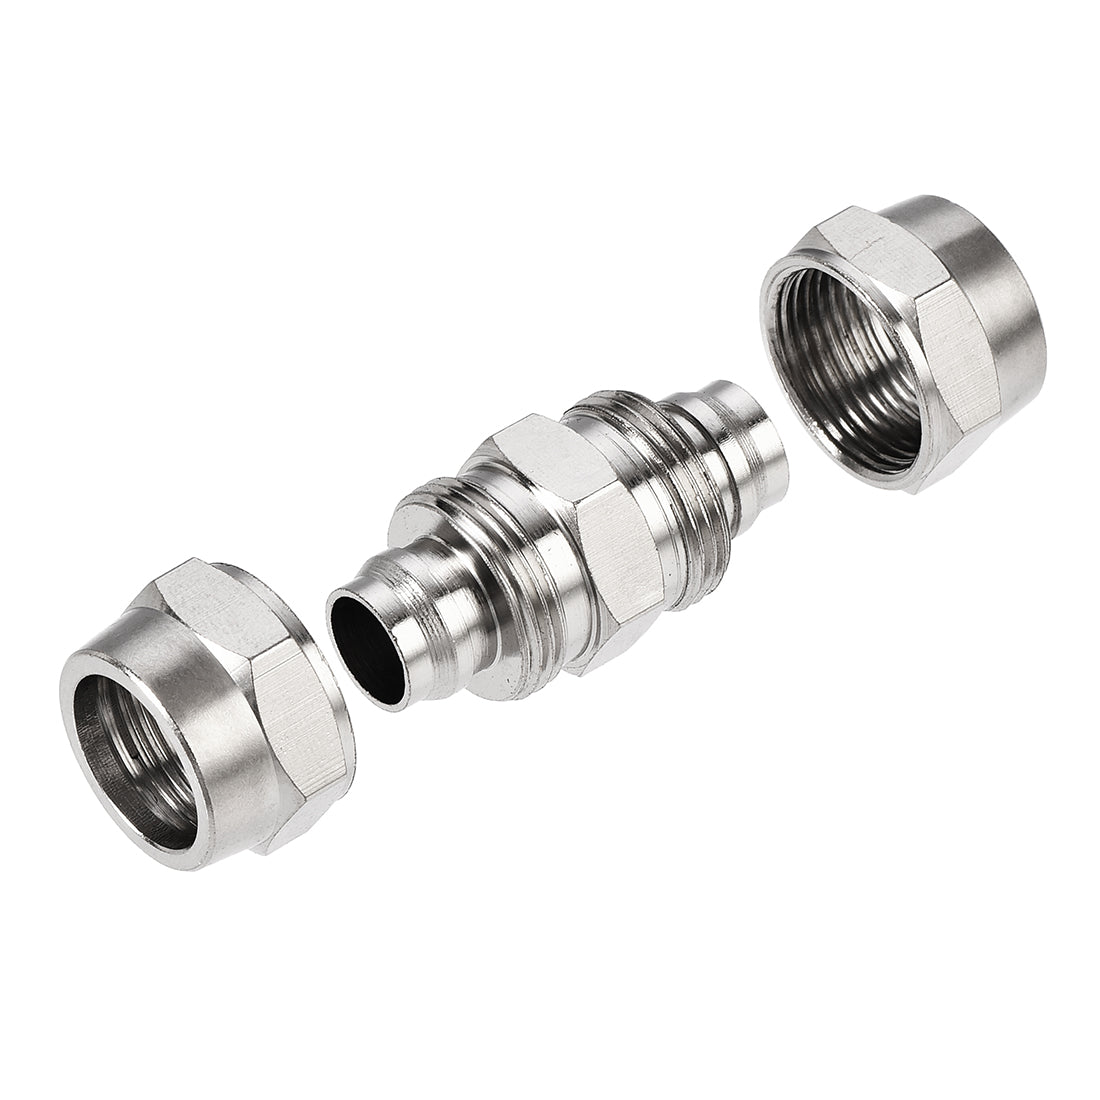 uxcell Uxcell Compression Tube Fitting Nickel Plating for 12mm Pneumatic Hose Tube 2pcs